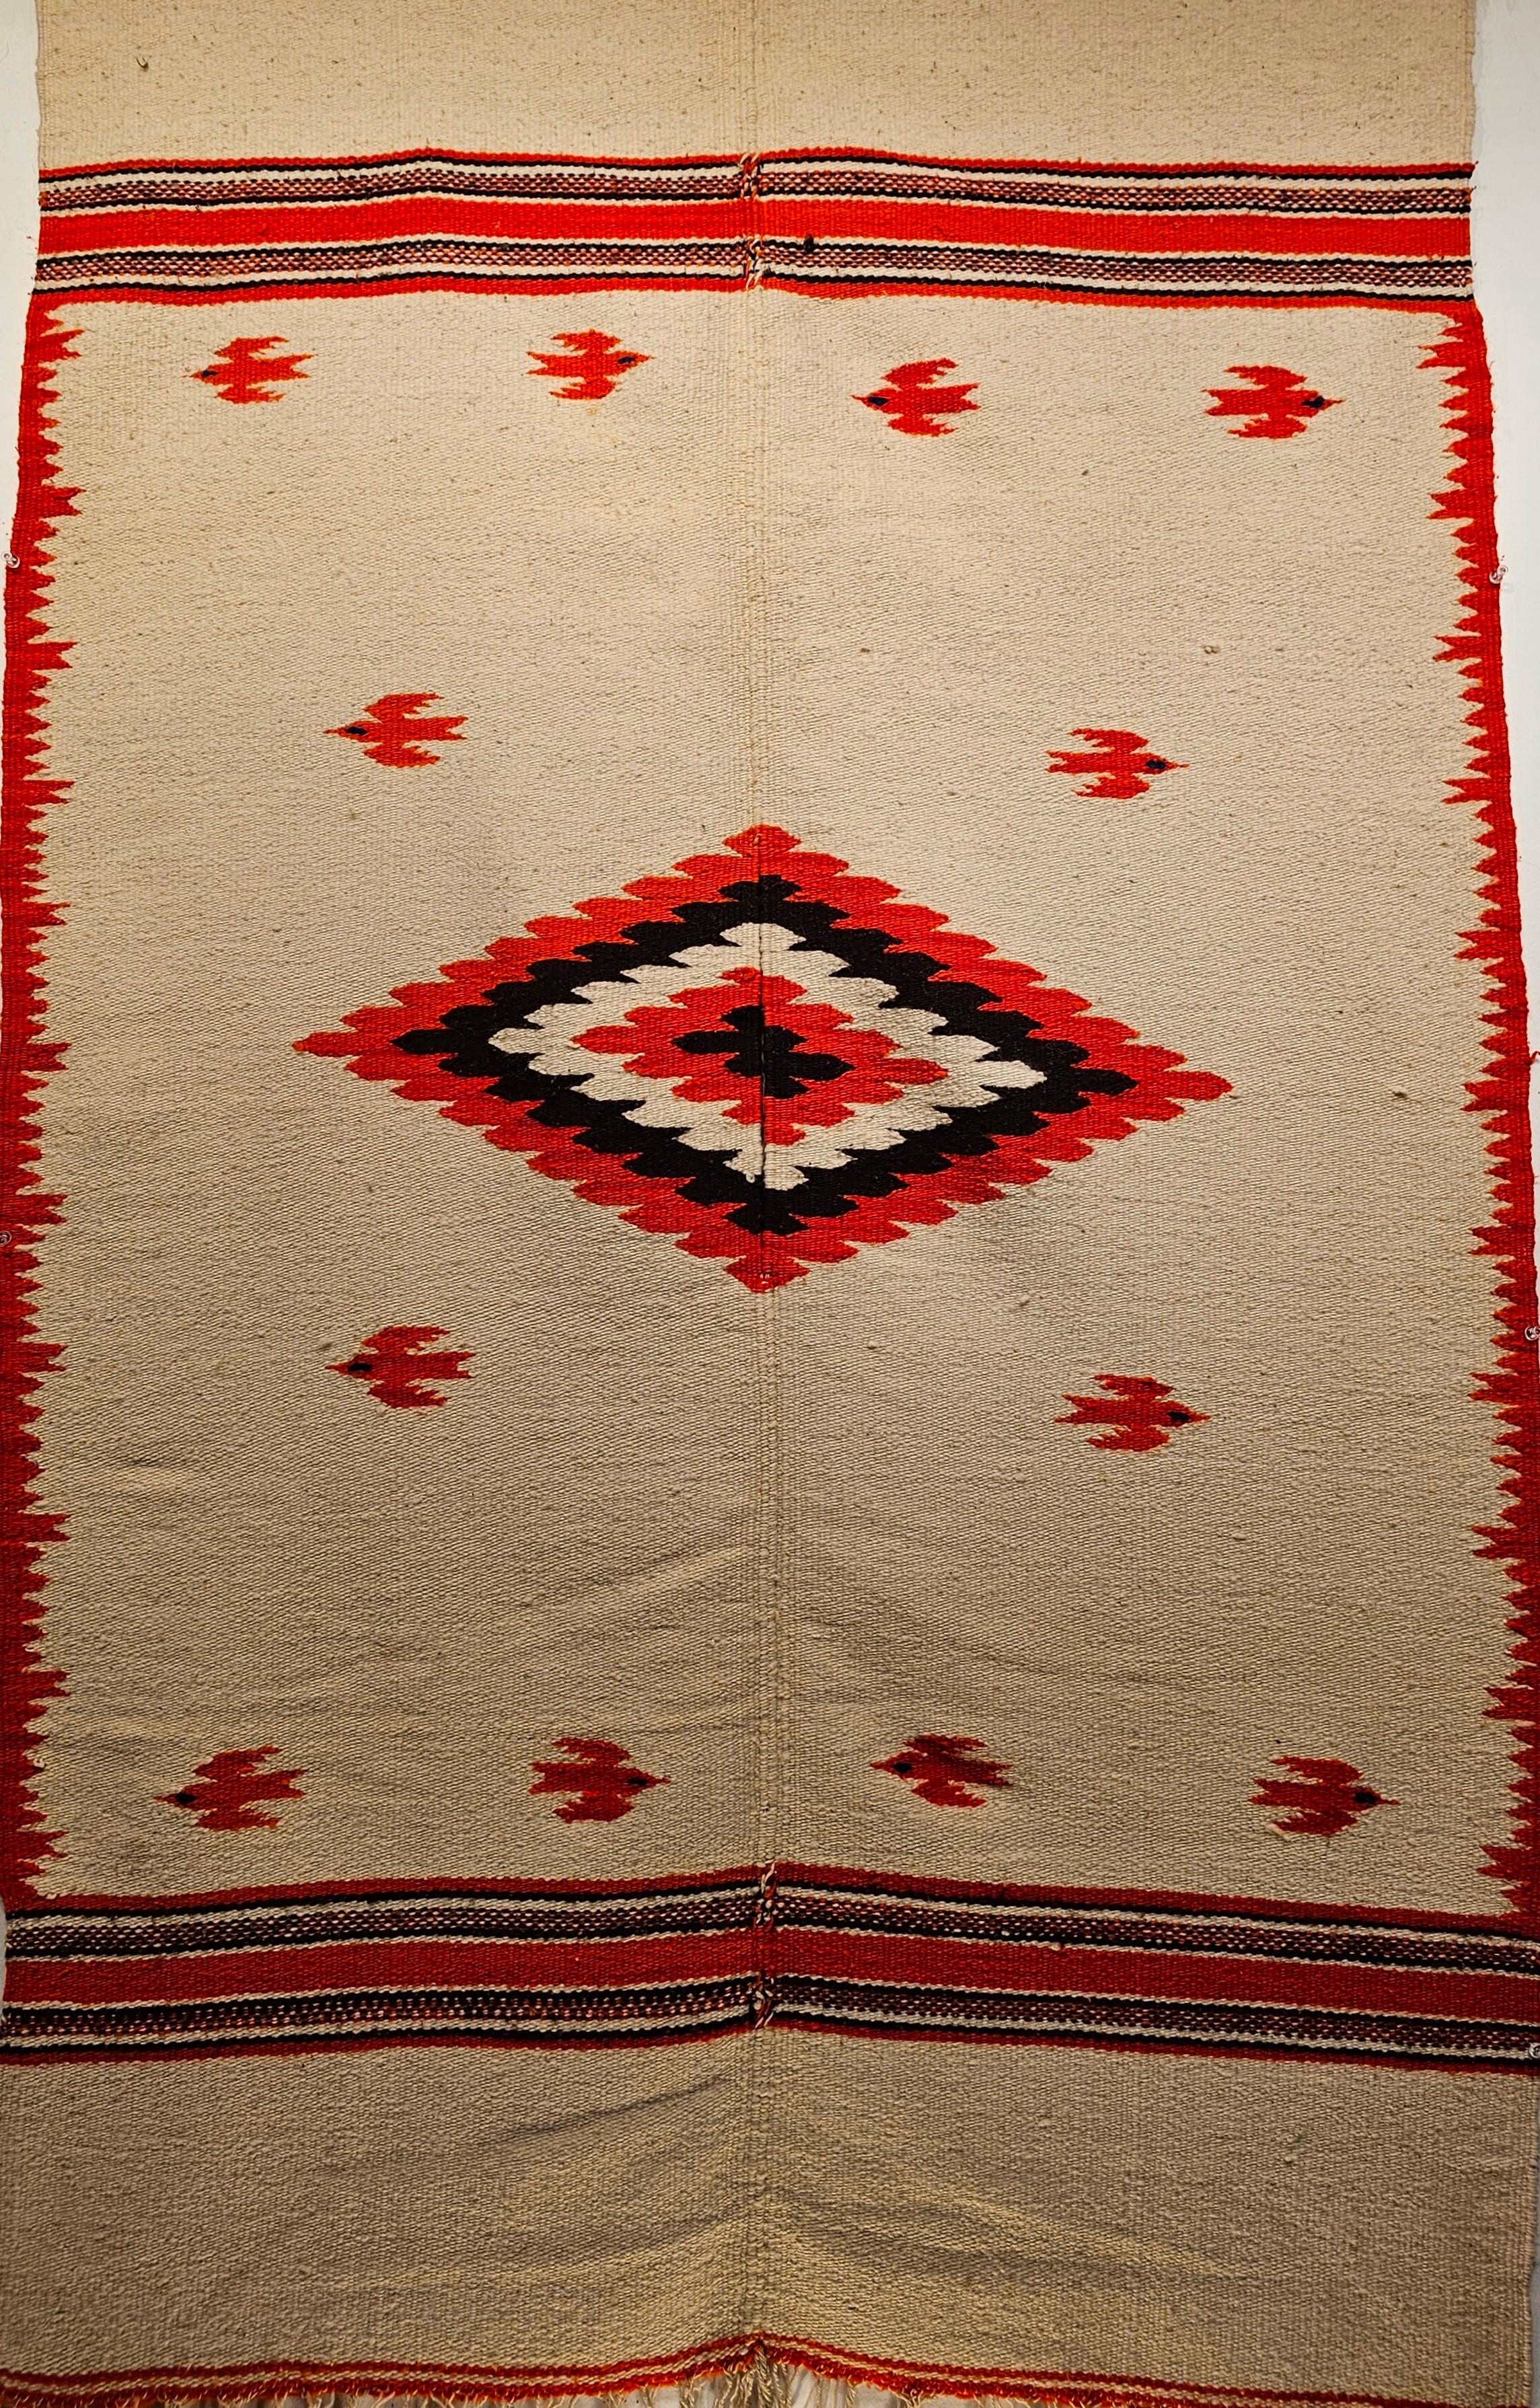 Vintage Mexican Serape Saltillo Kilim Rug in cream color. A beautiful Serape kilim blanket rug was woven in Mexico in the late 20th century. The rug has a beautiful cream or wheat colored wool with designs of birds in vibrant orange. It has a